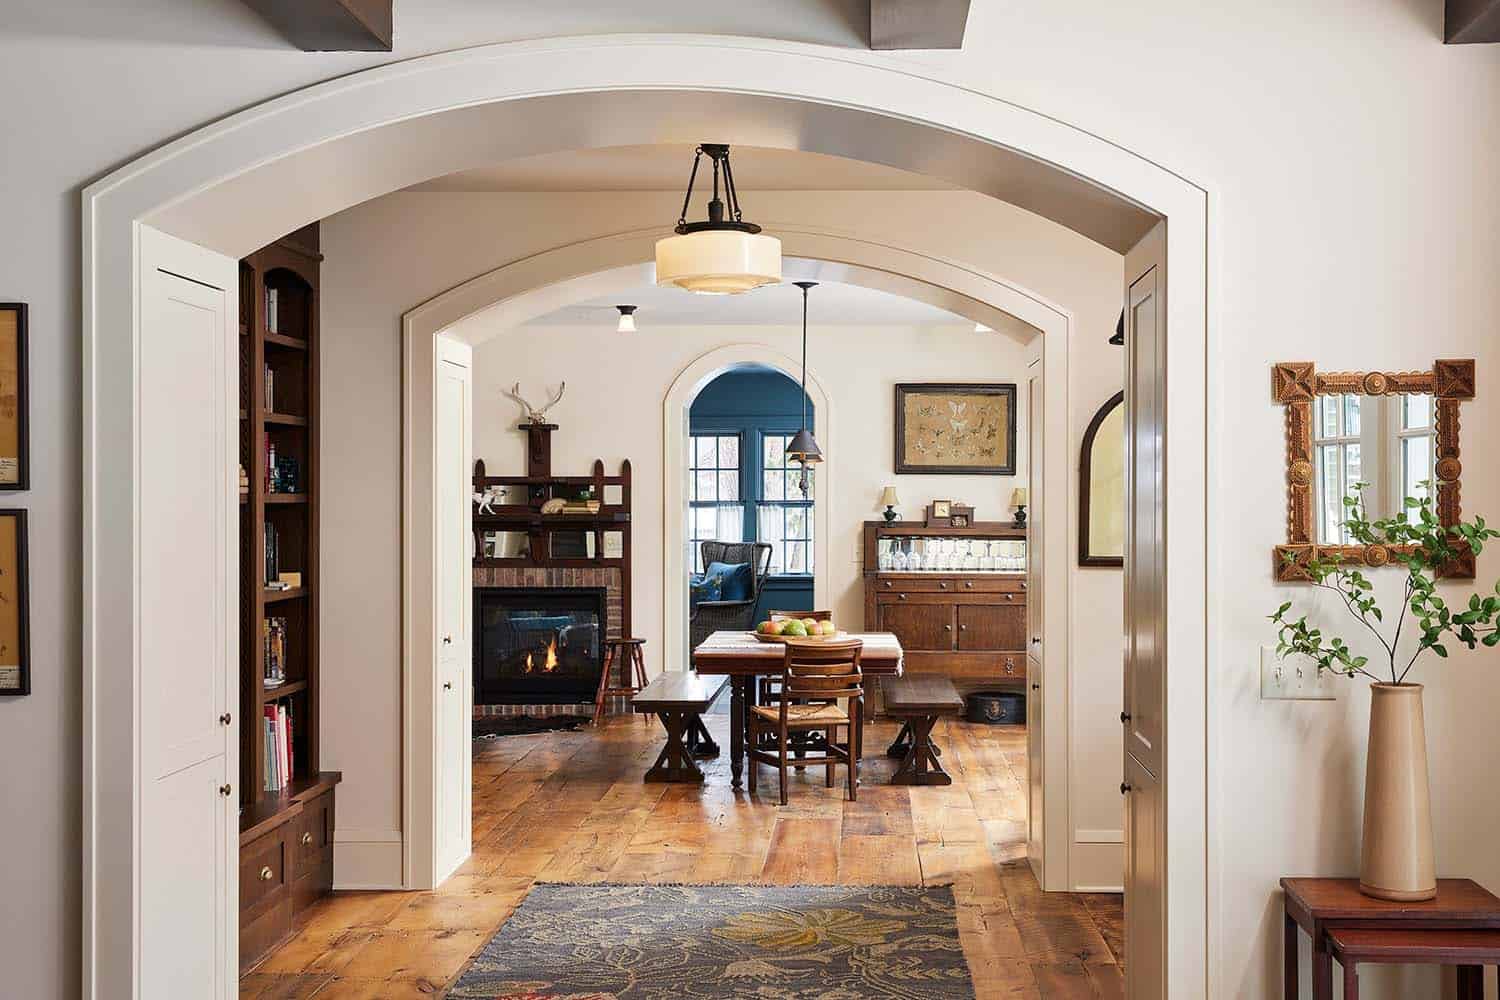 transitional hallway with an arched opening